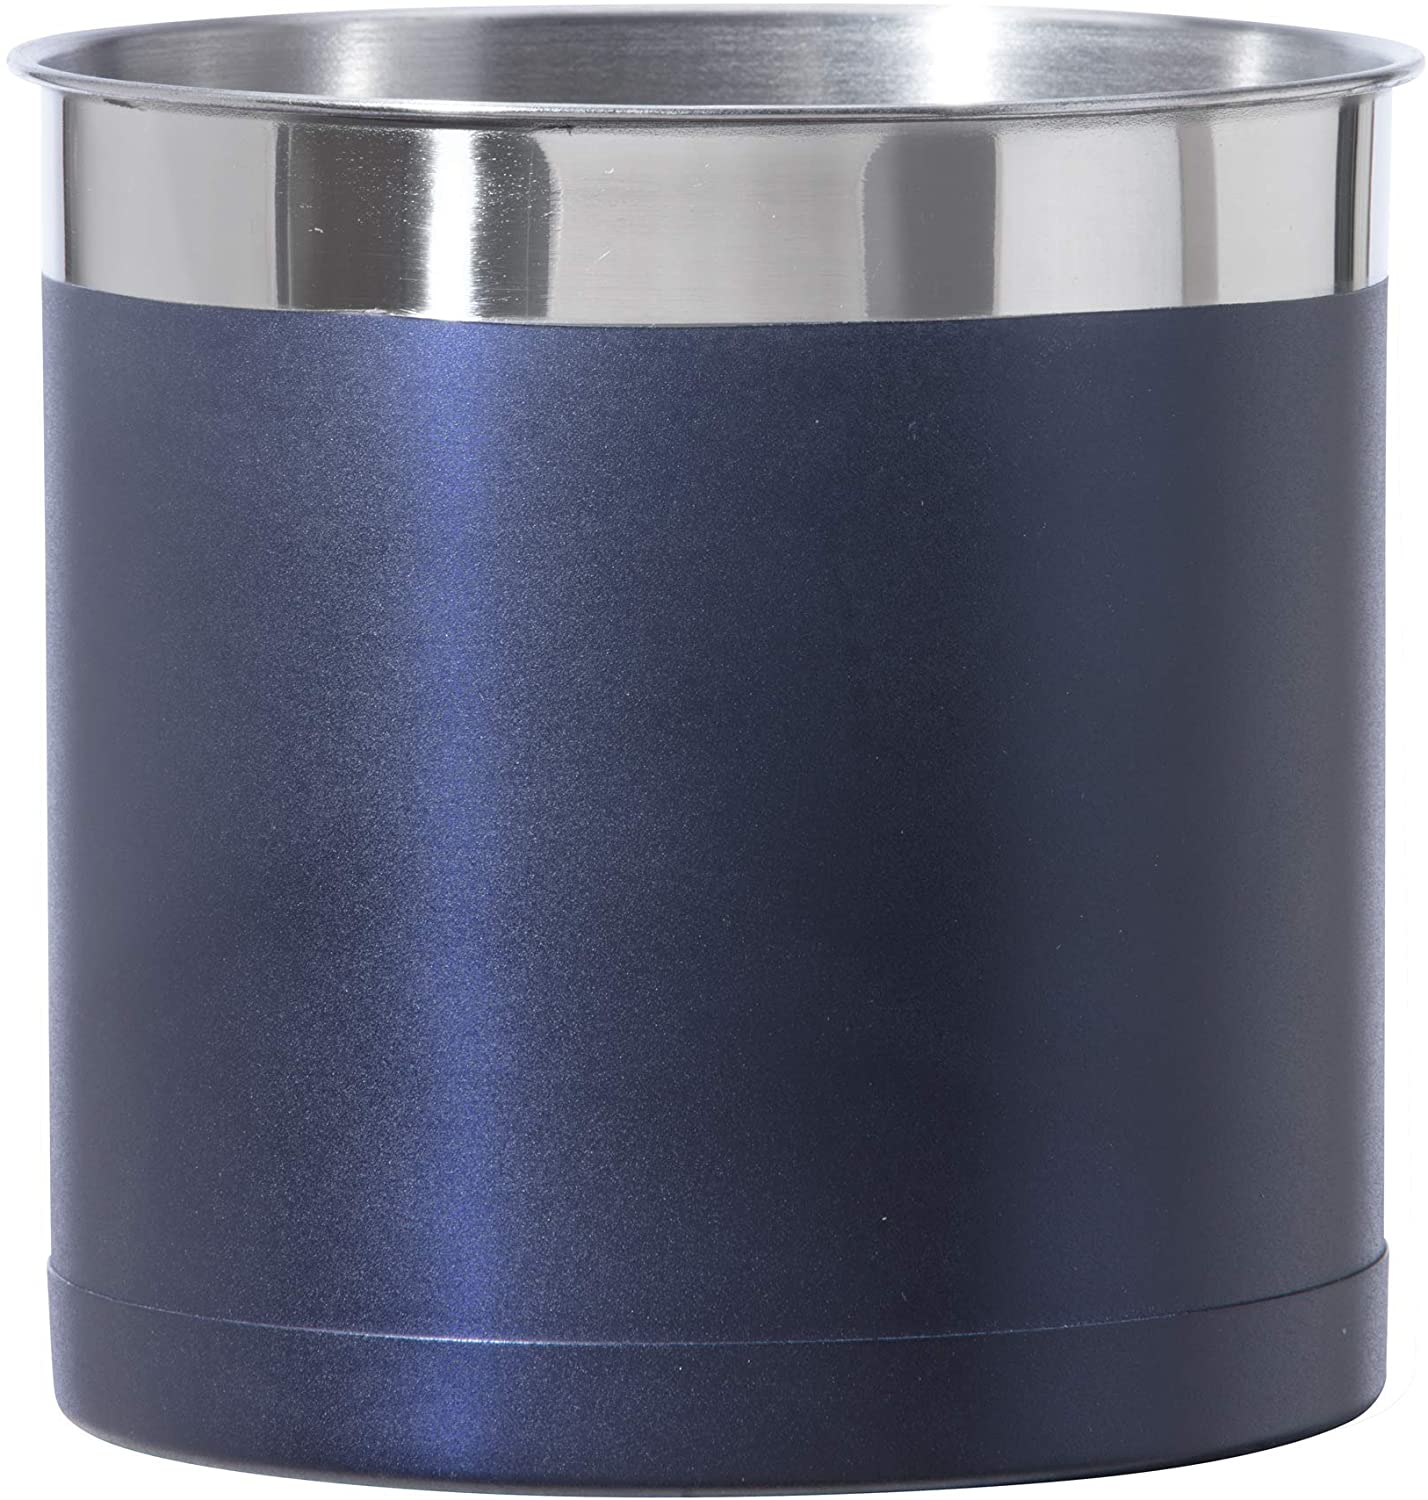 navy crock with stainless steel top rim.